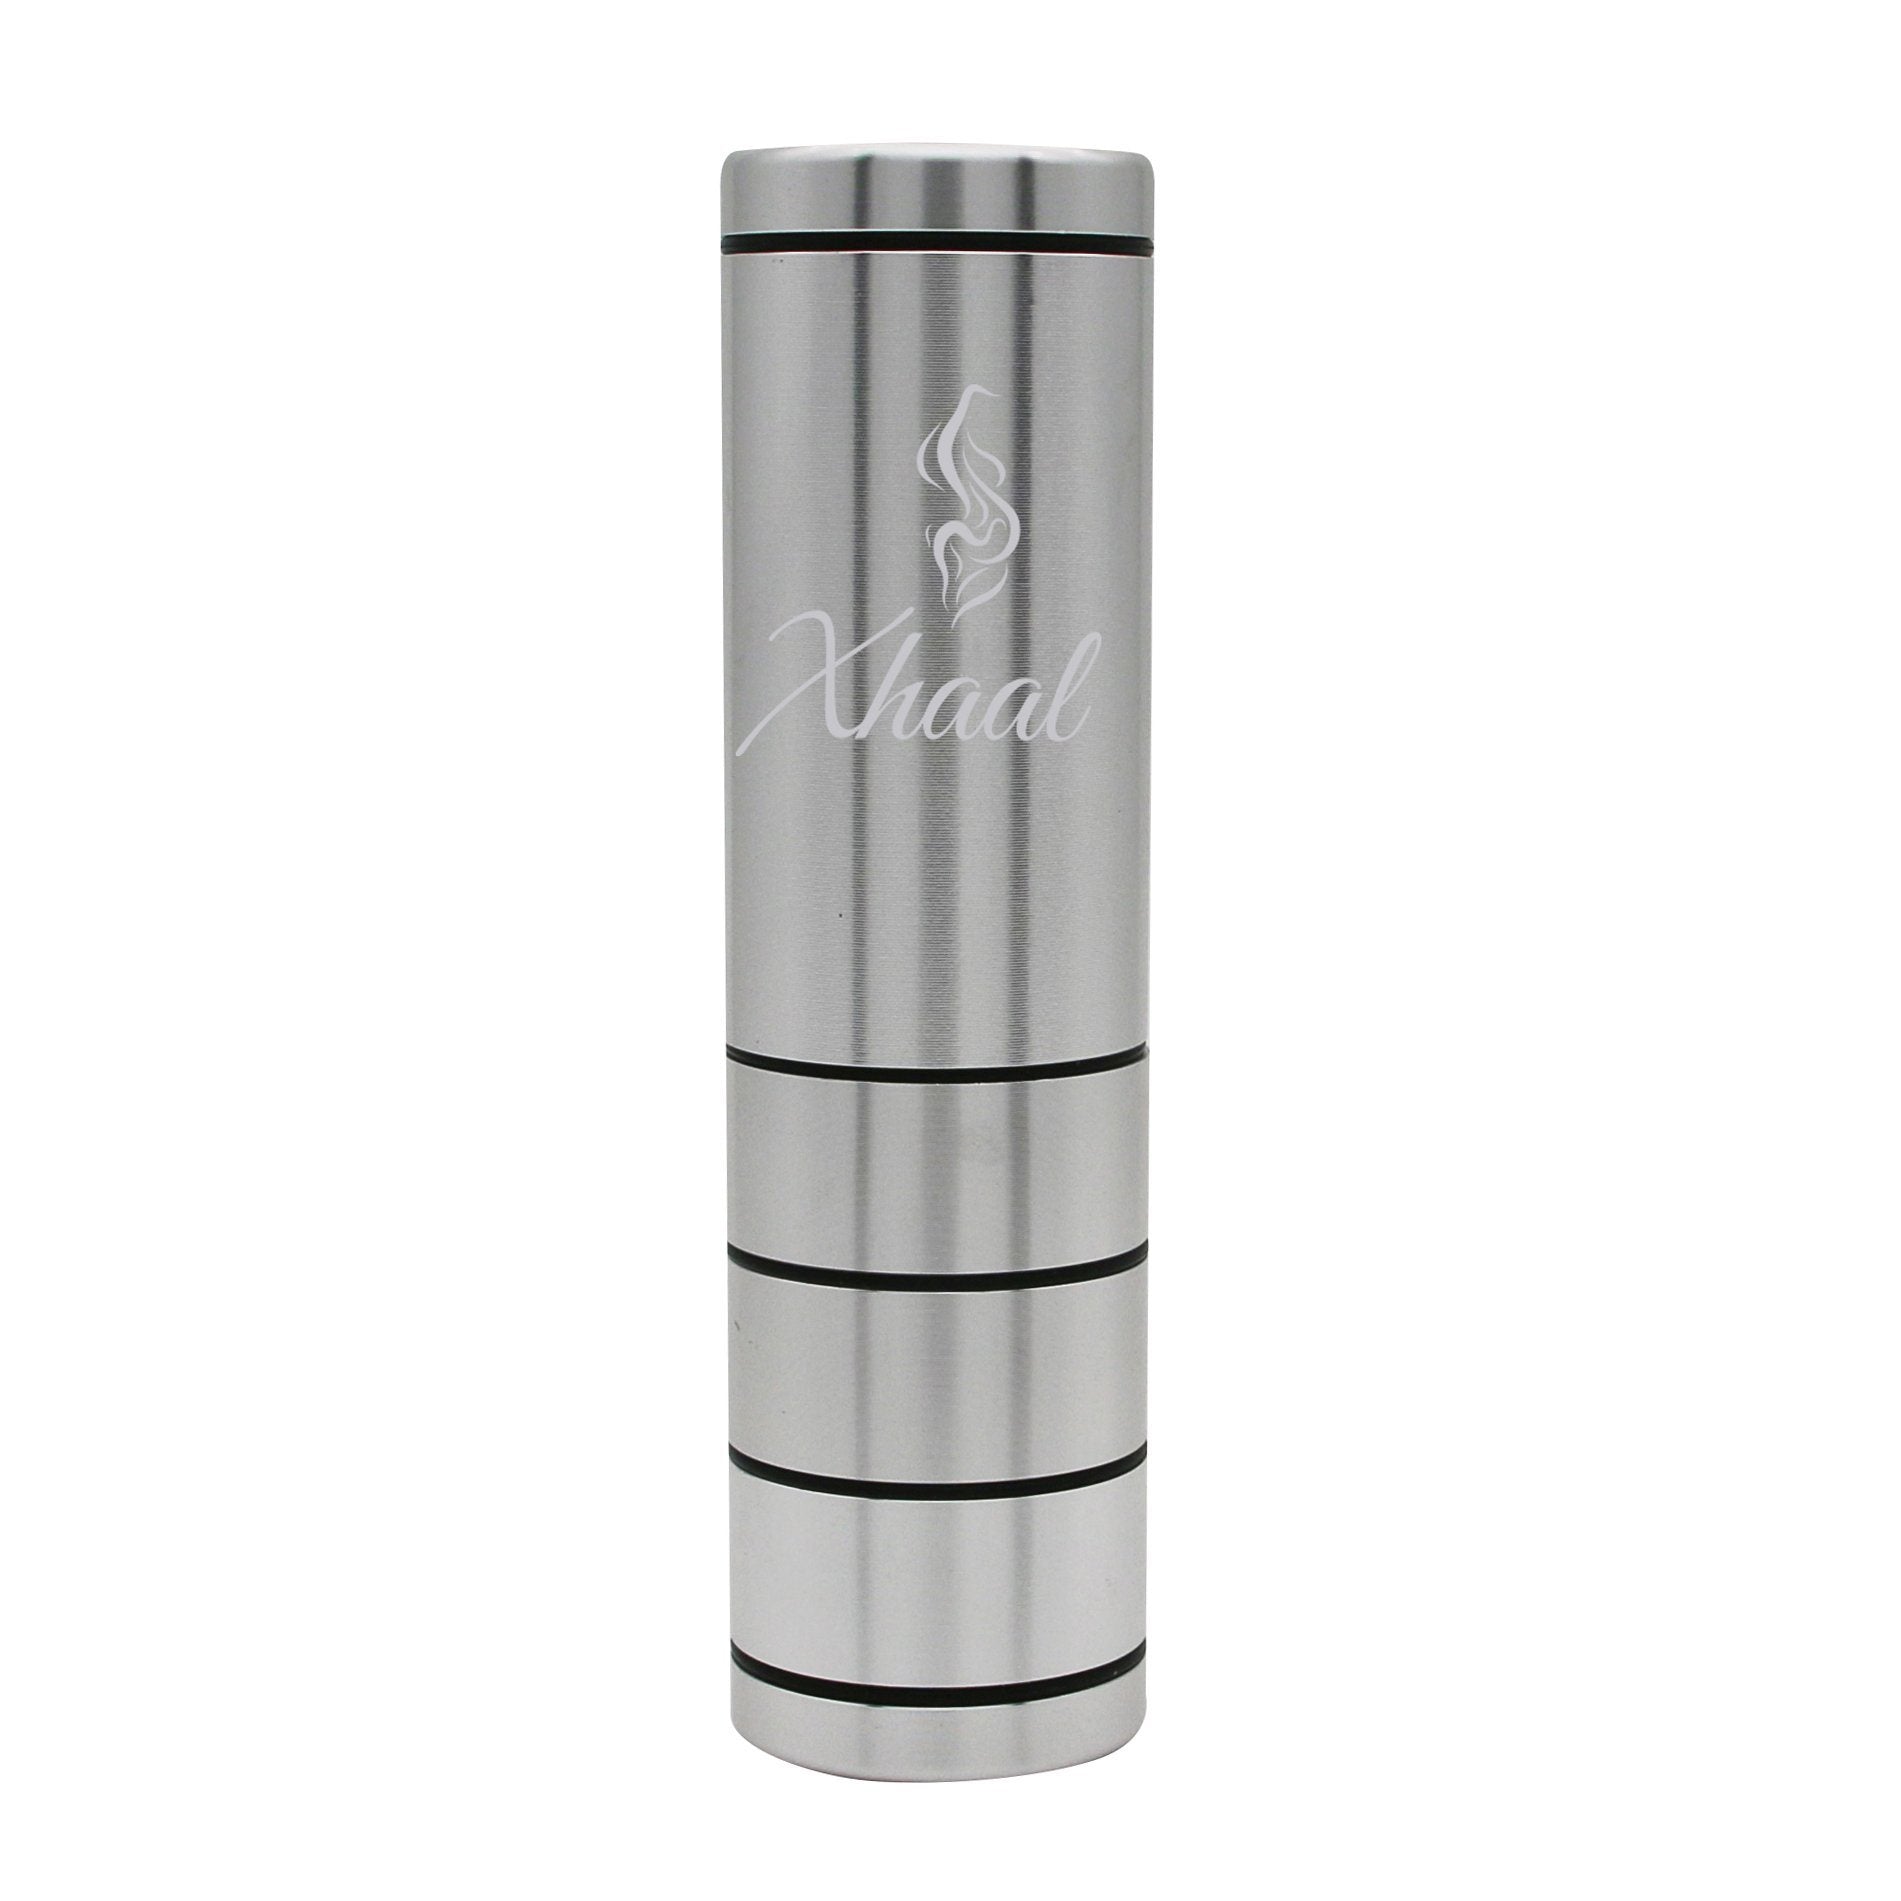 Dugout Grinder Flower Power Packages silver 